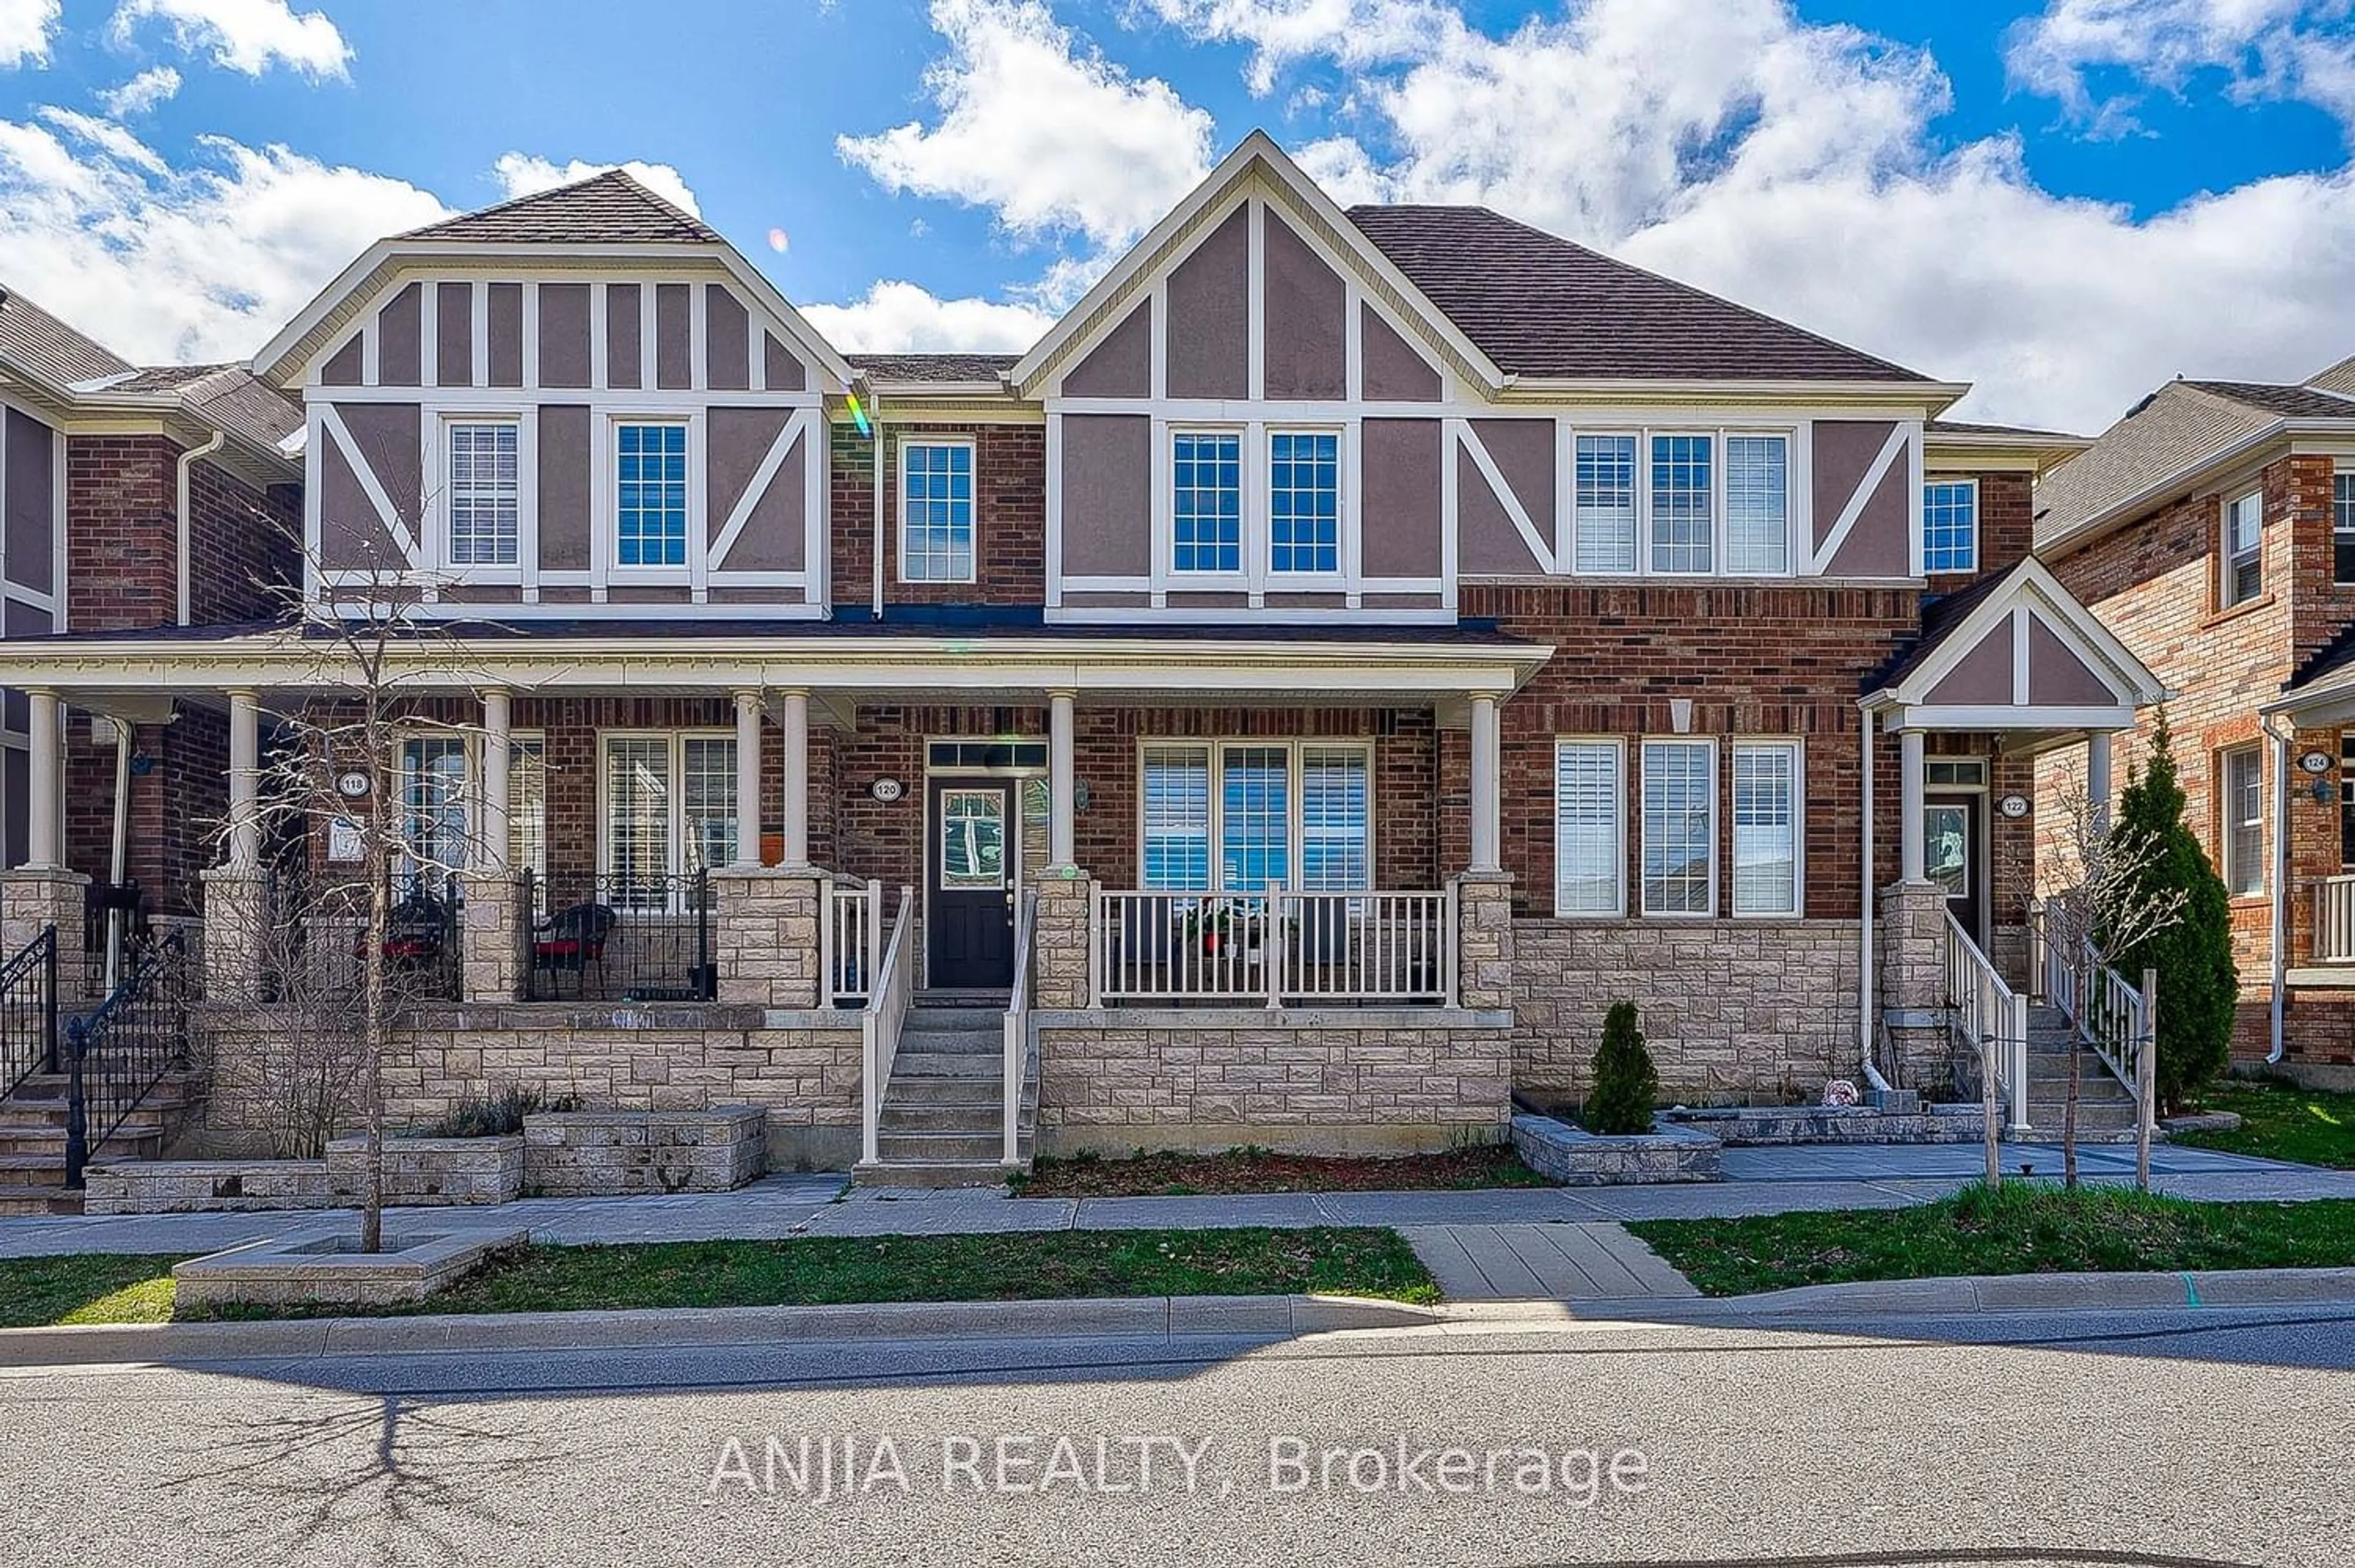 Home with brick exterior material for 120 Terry Fox St, Markham Ontario L6B 0W7